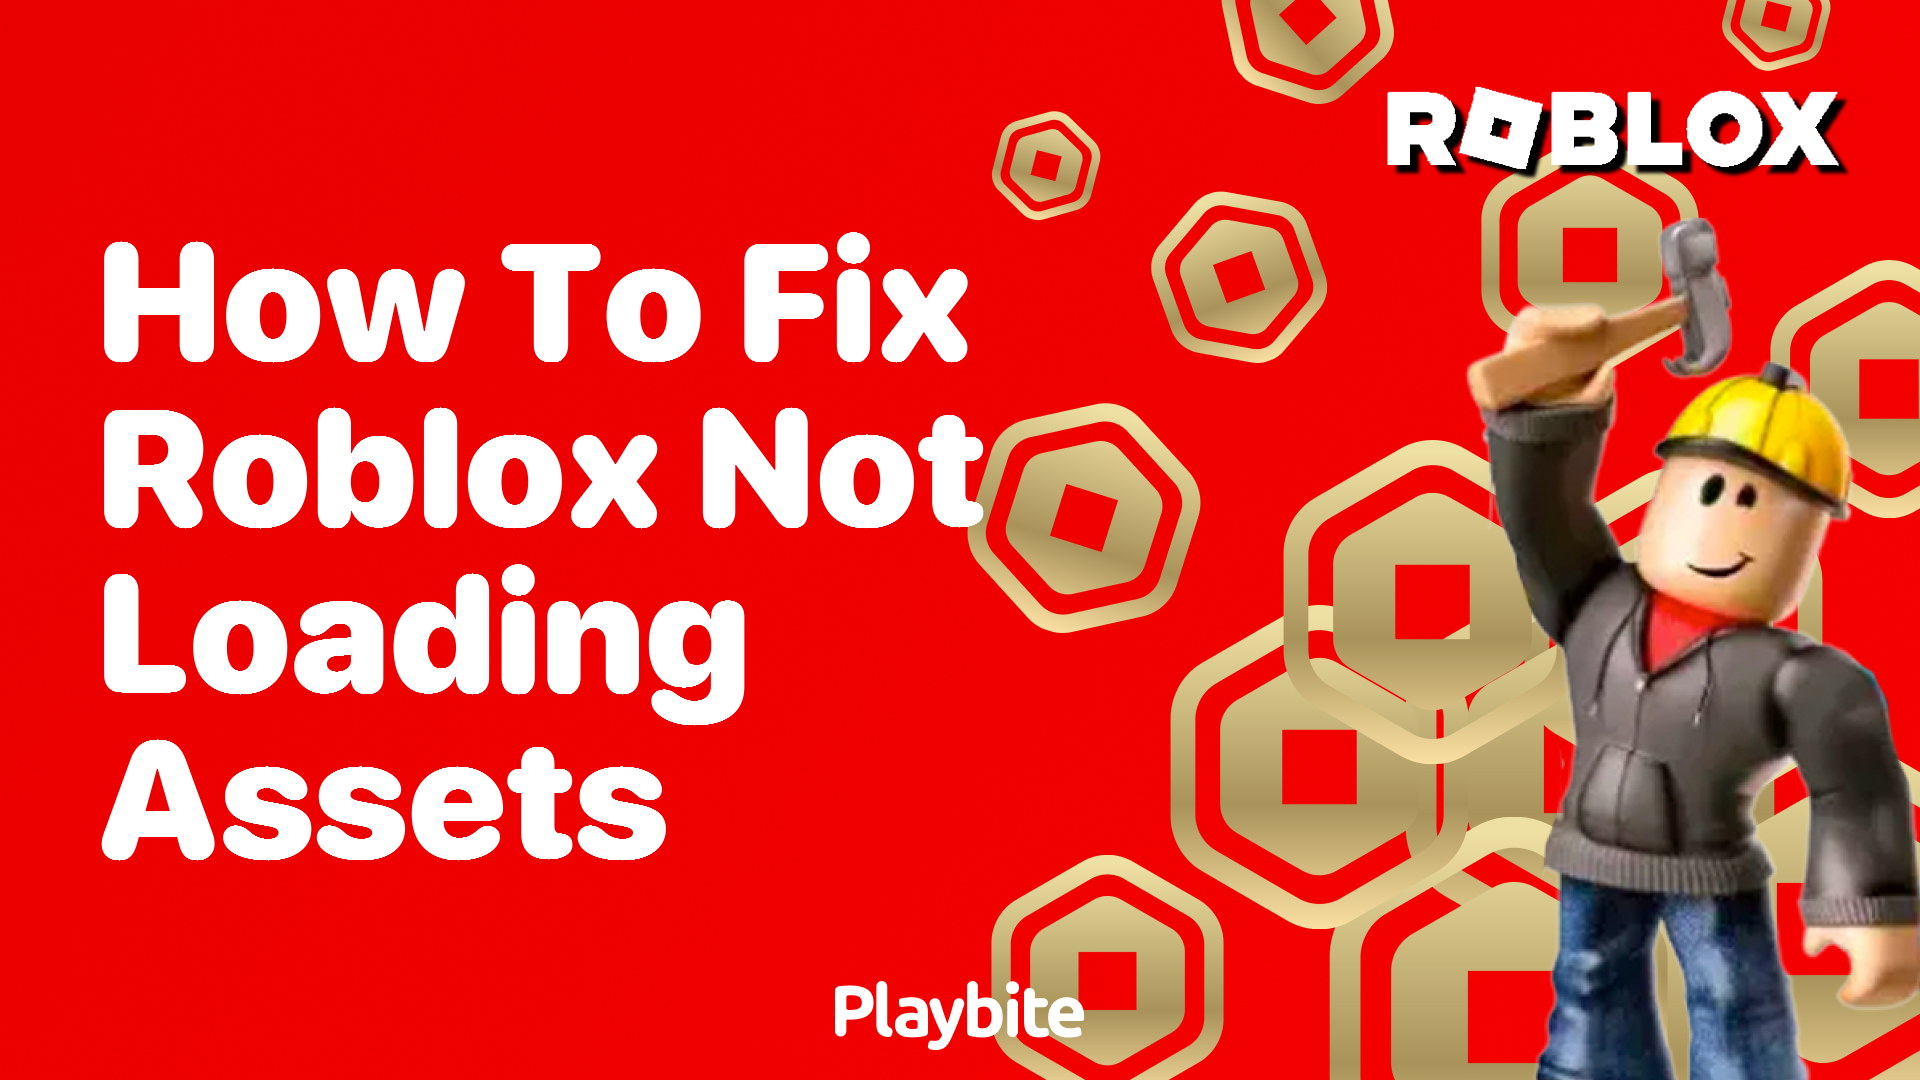 How to Fix Roblox Not Loading Assets: Quick Tips